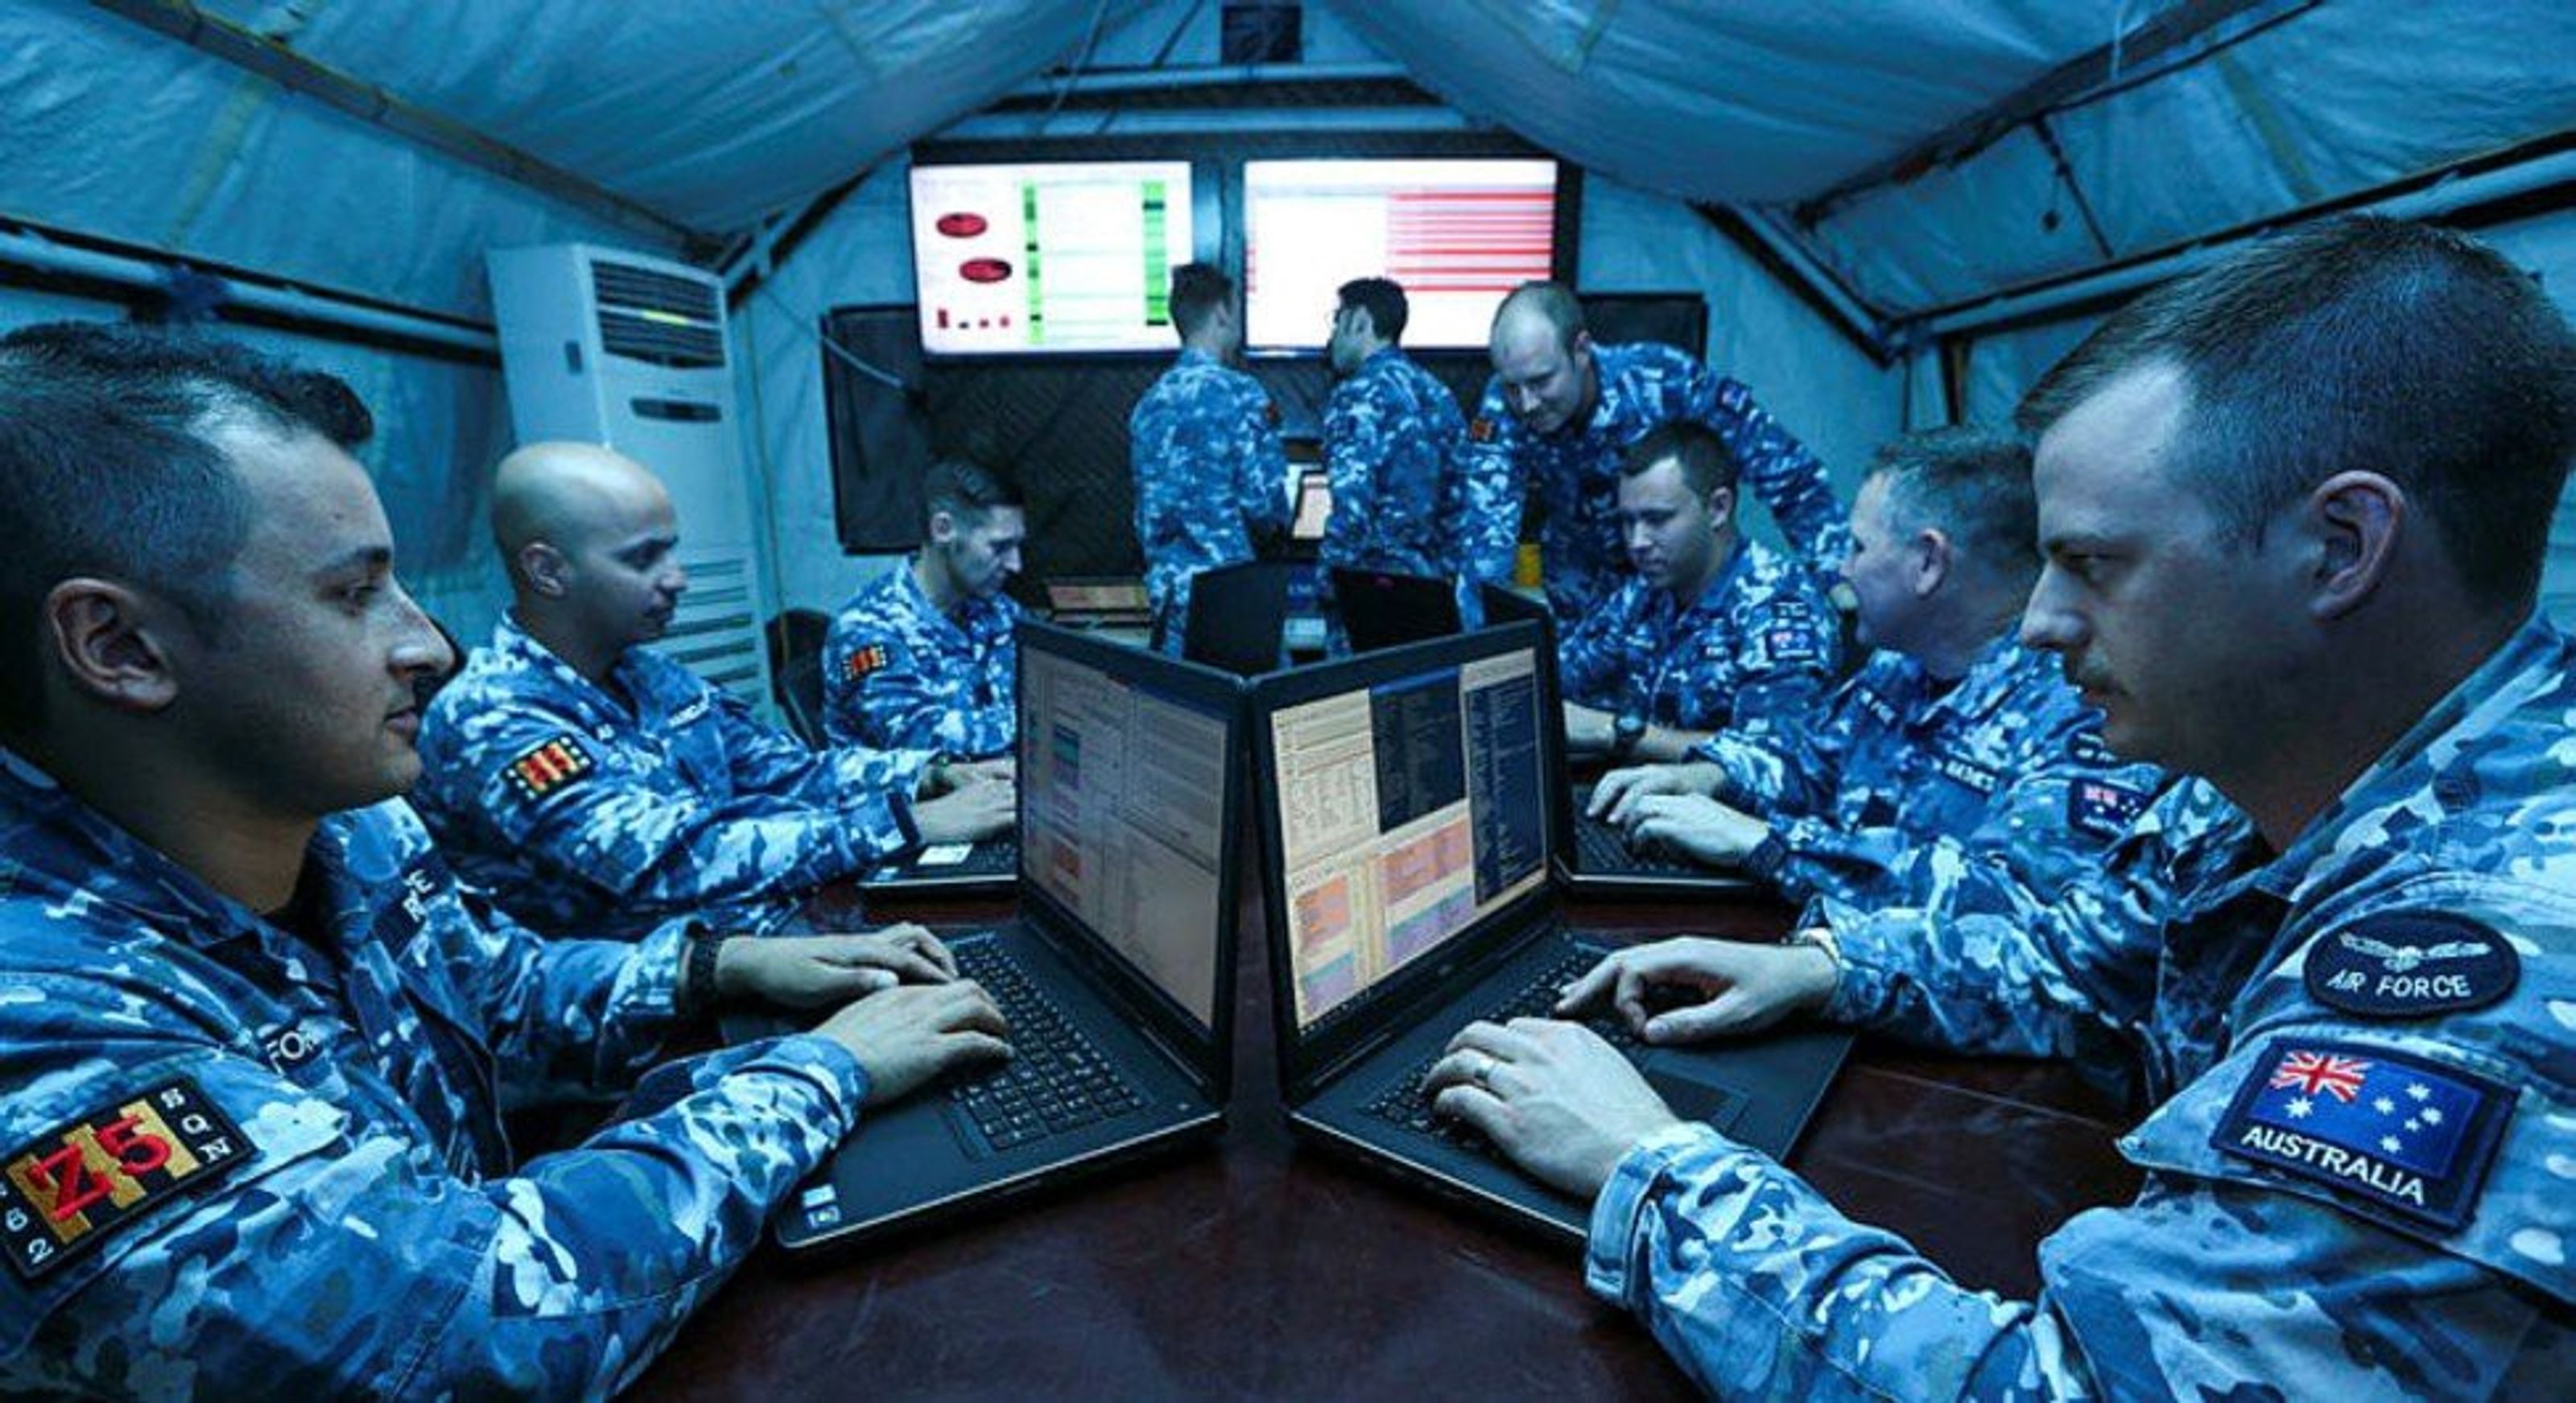 Royal Australian Air Force cyber warfare officers undergoing a training exercise (ASPI)